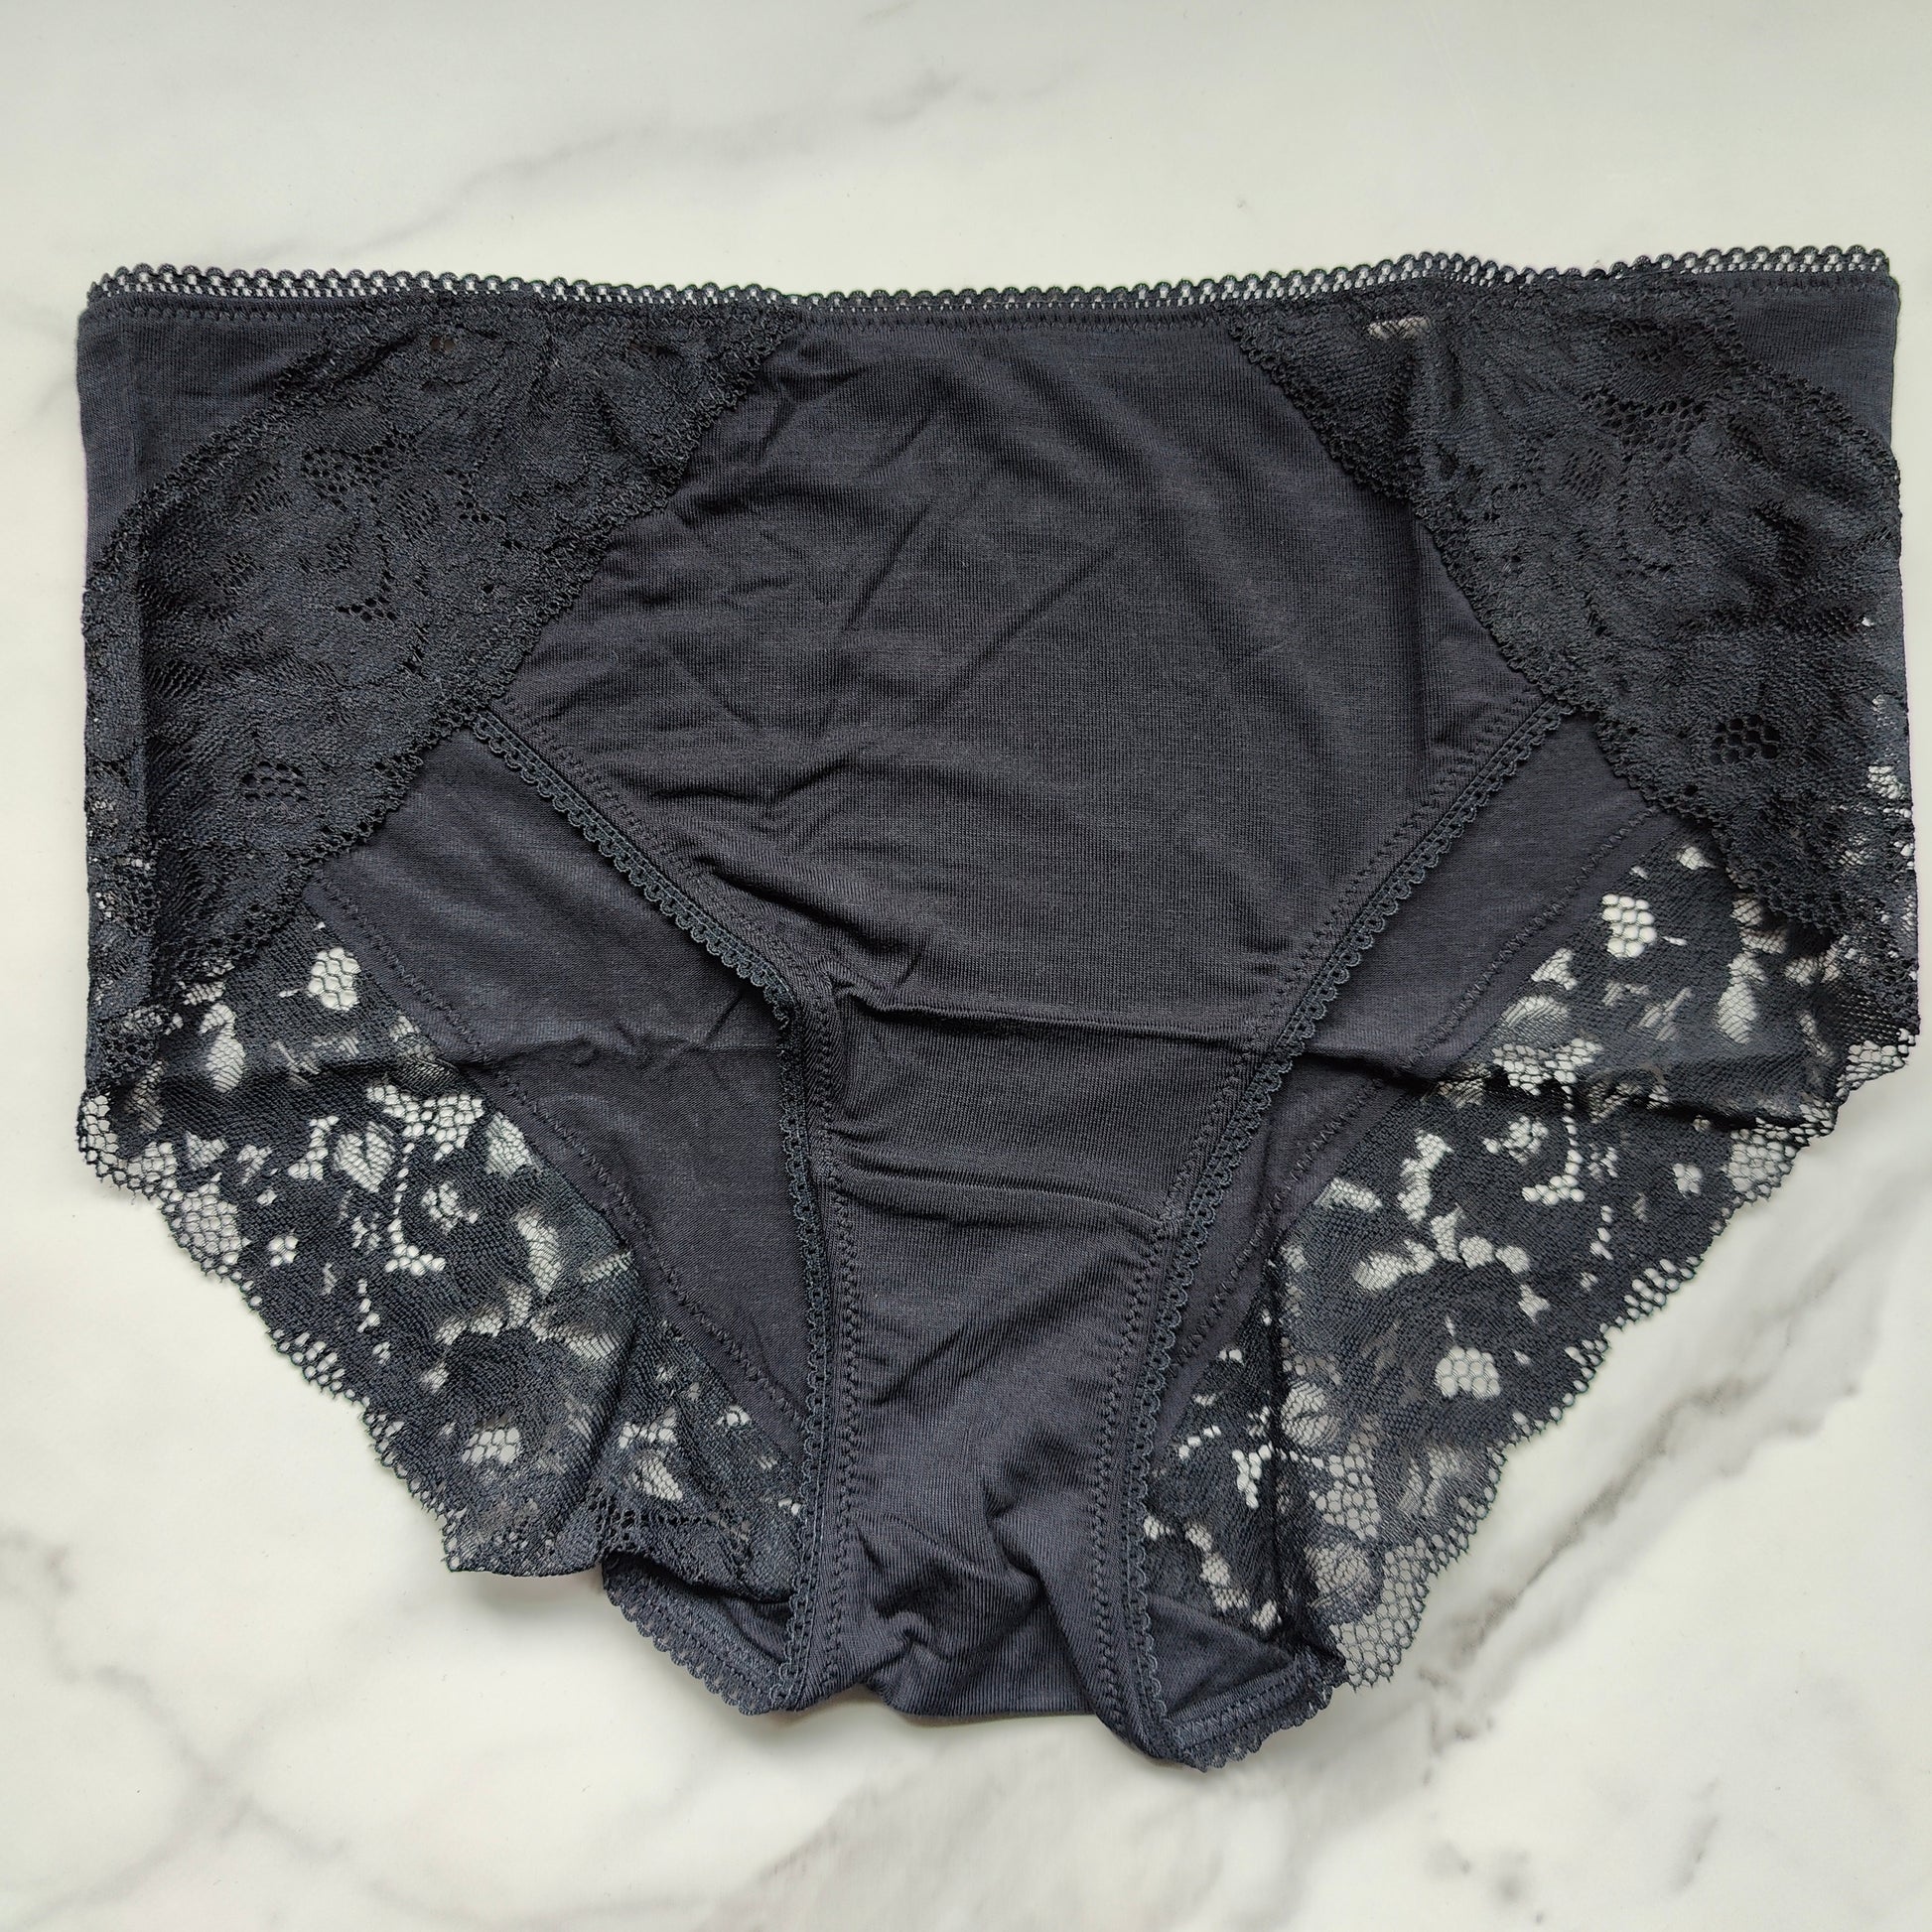 7 for $37 Embraceable Panty Event at Soma